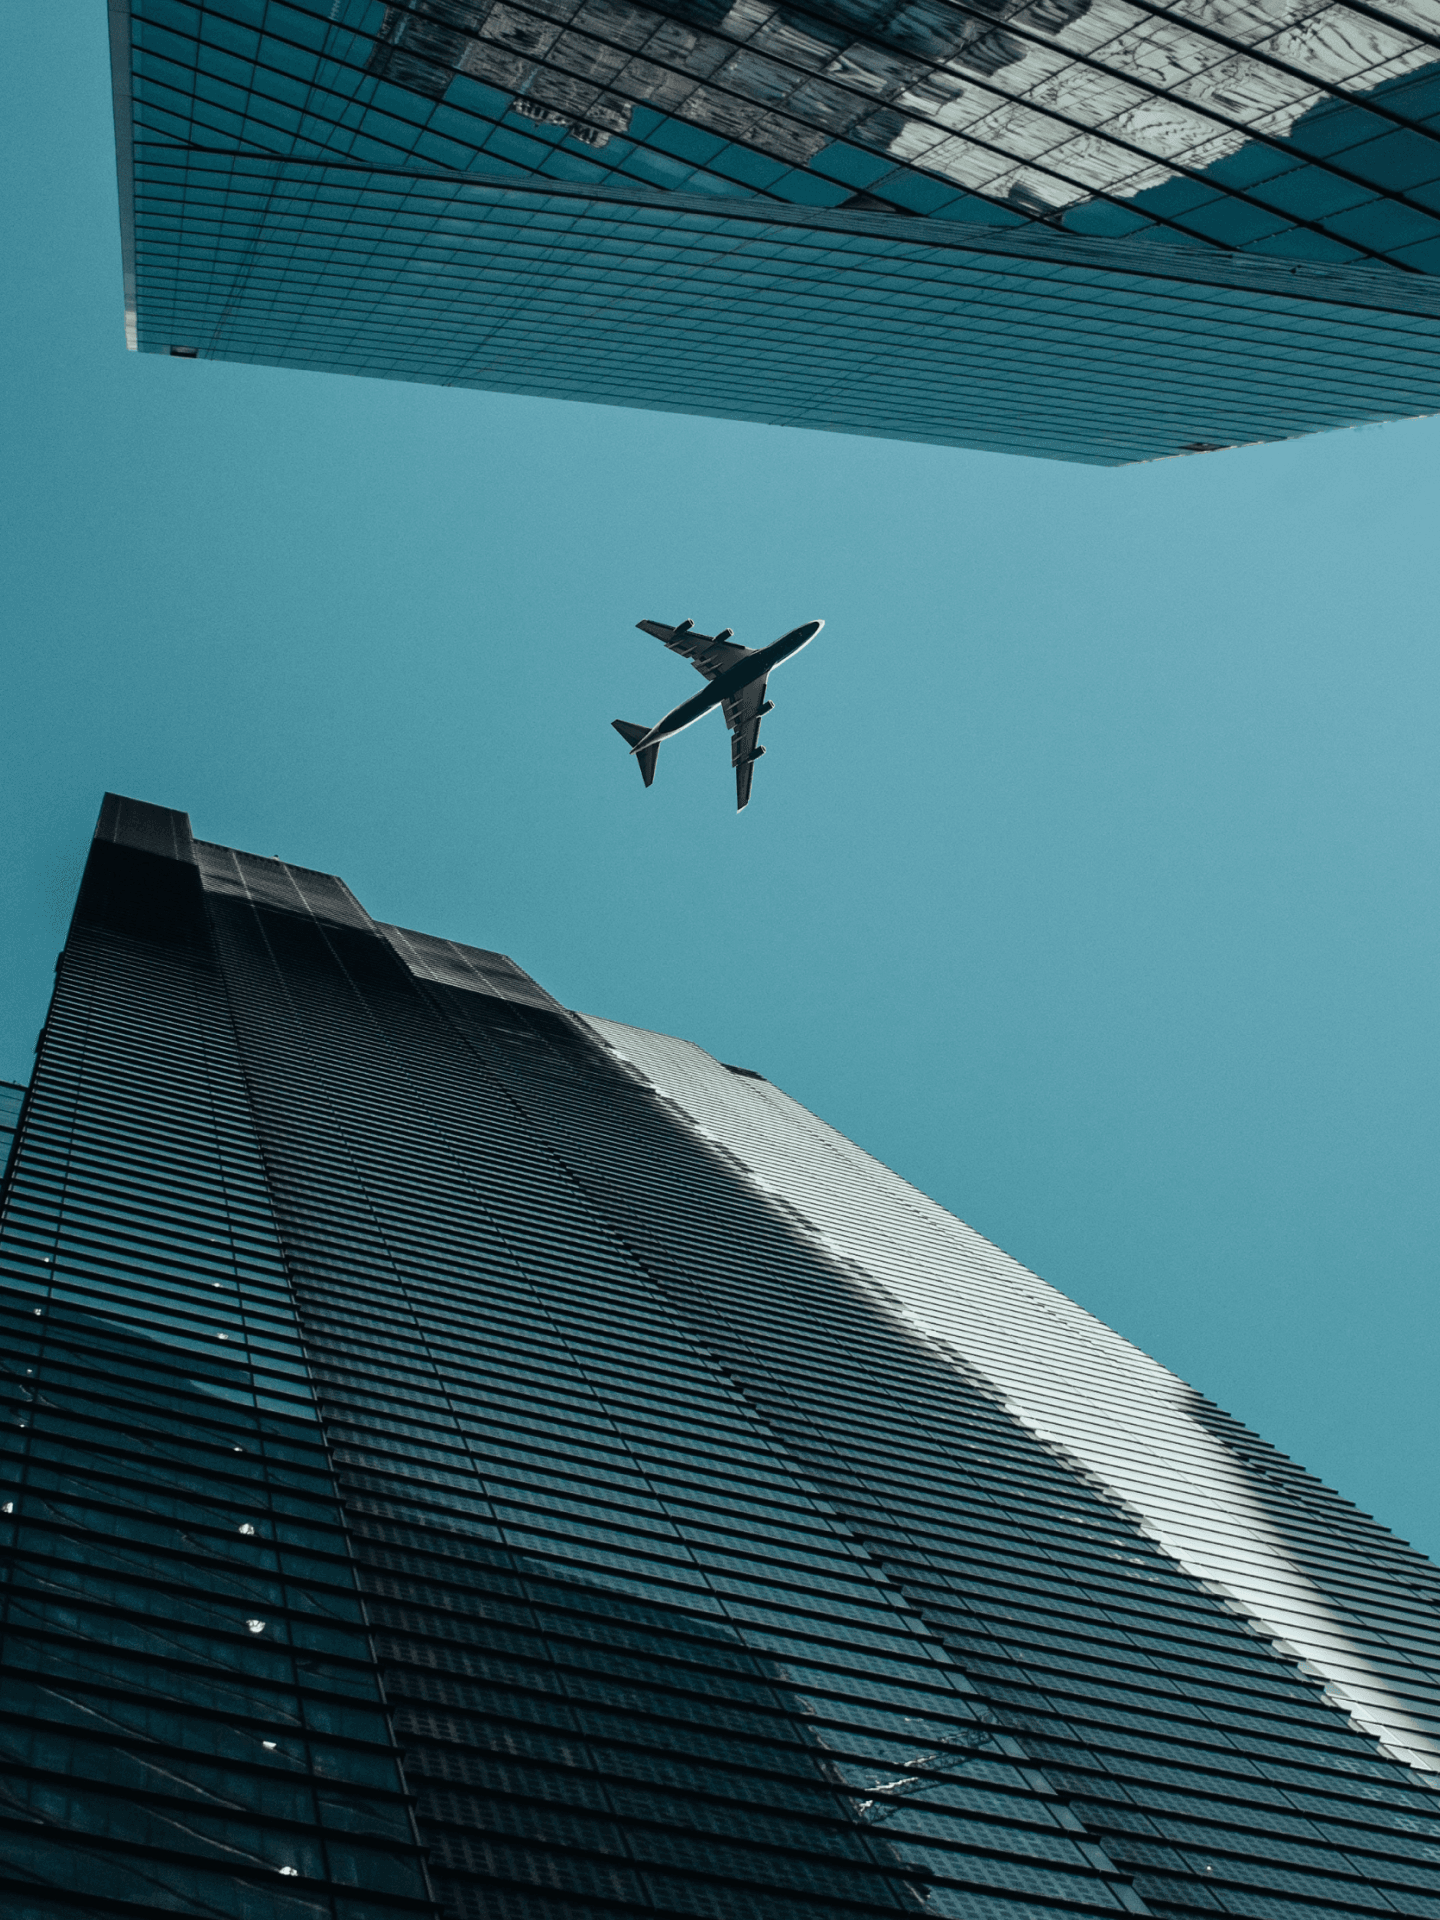 The seamless integration of flight and metropolitan structures is exemplified as an airplane gracefully glides over a majestic high-rise.